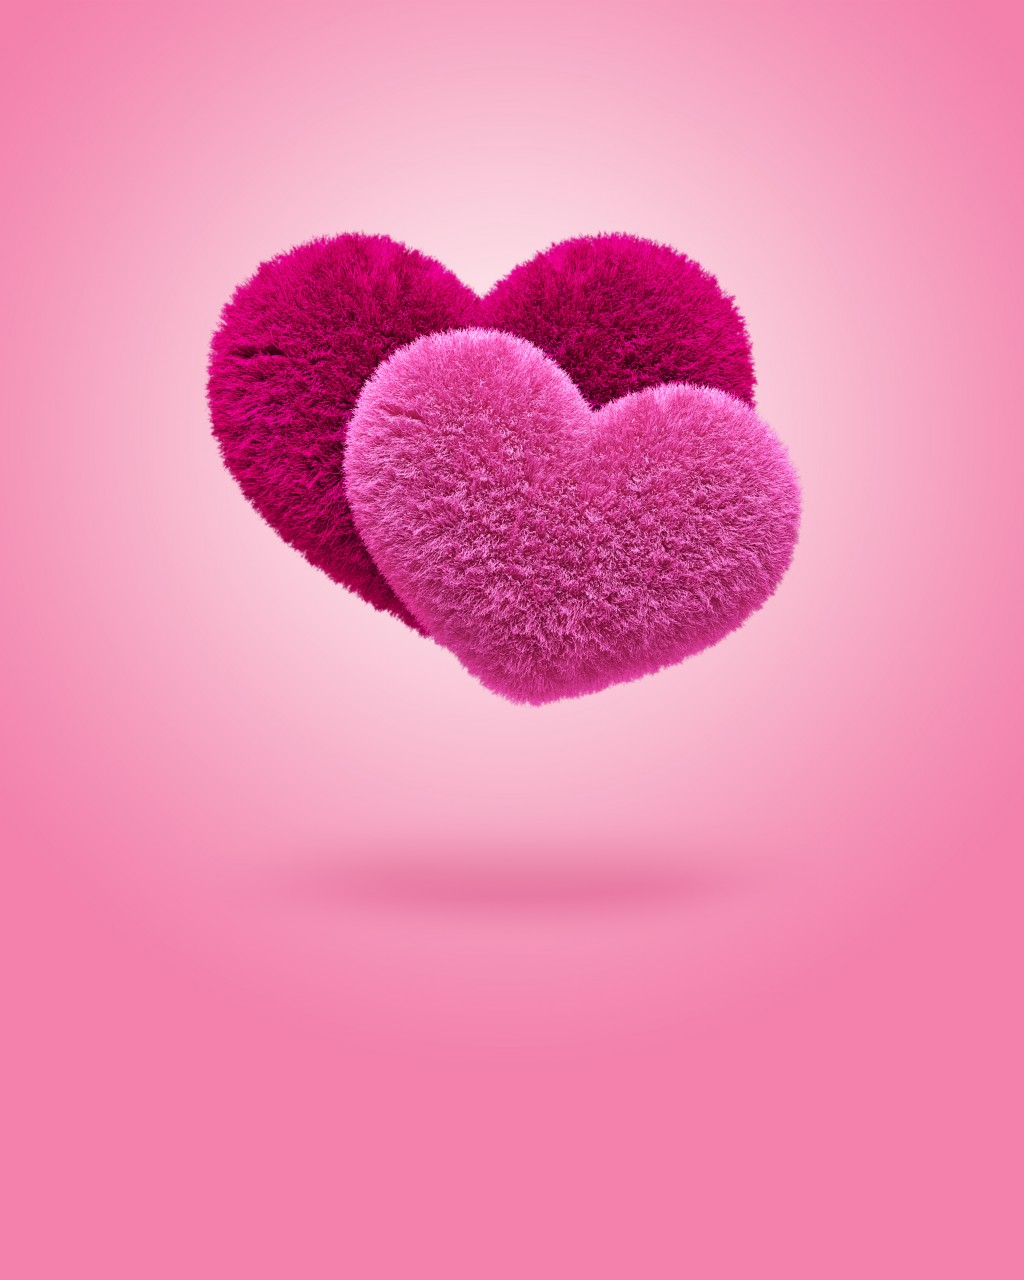 Cute Pink Heart Background Fluffy Hearts On